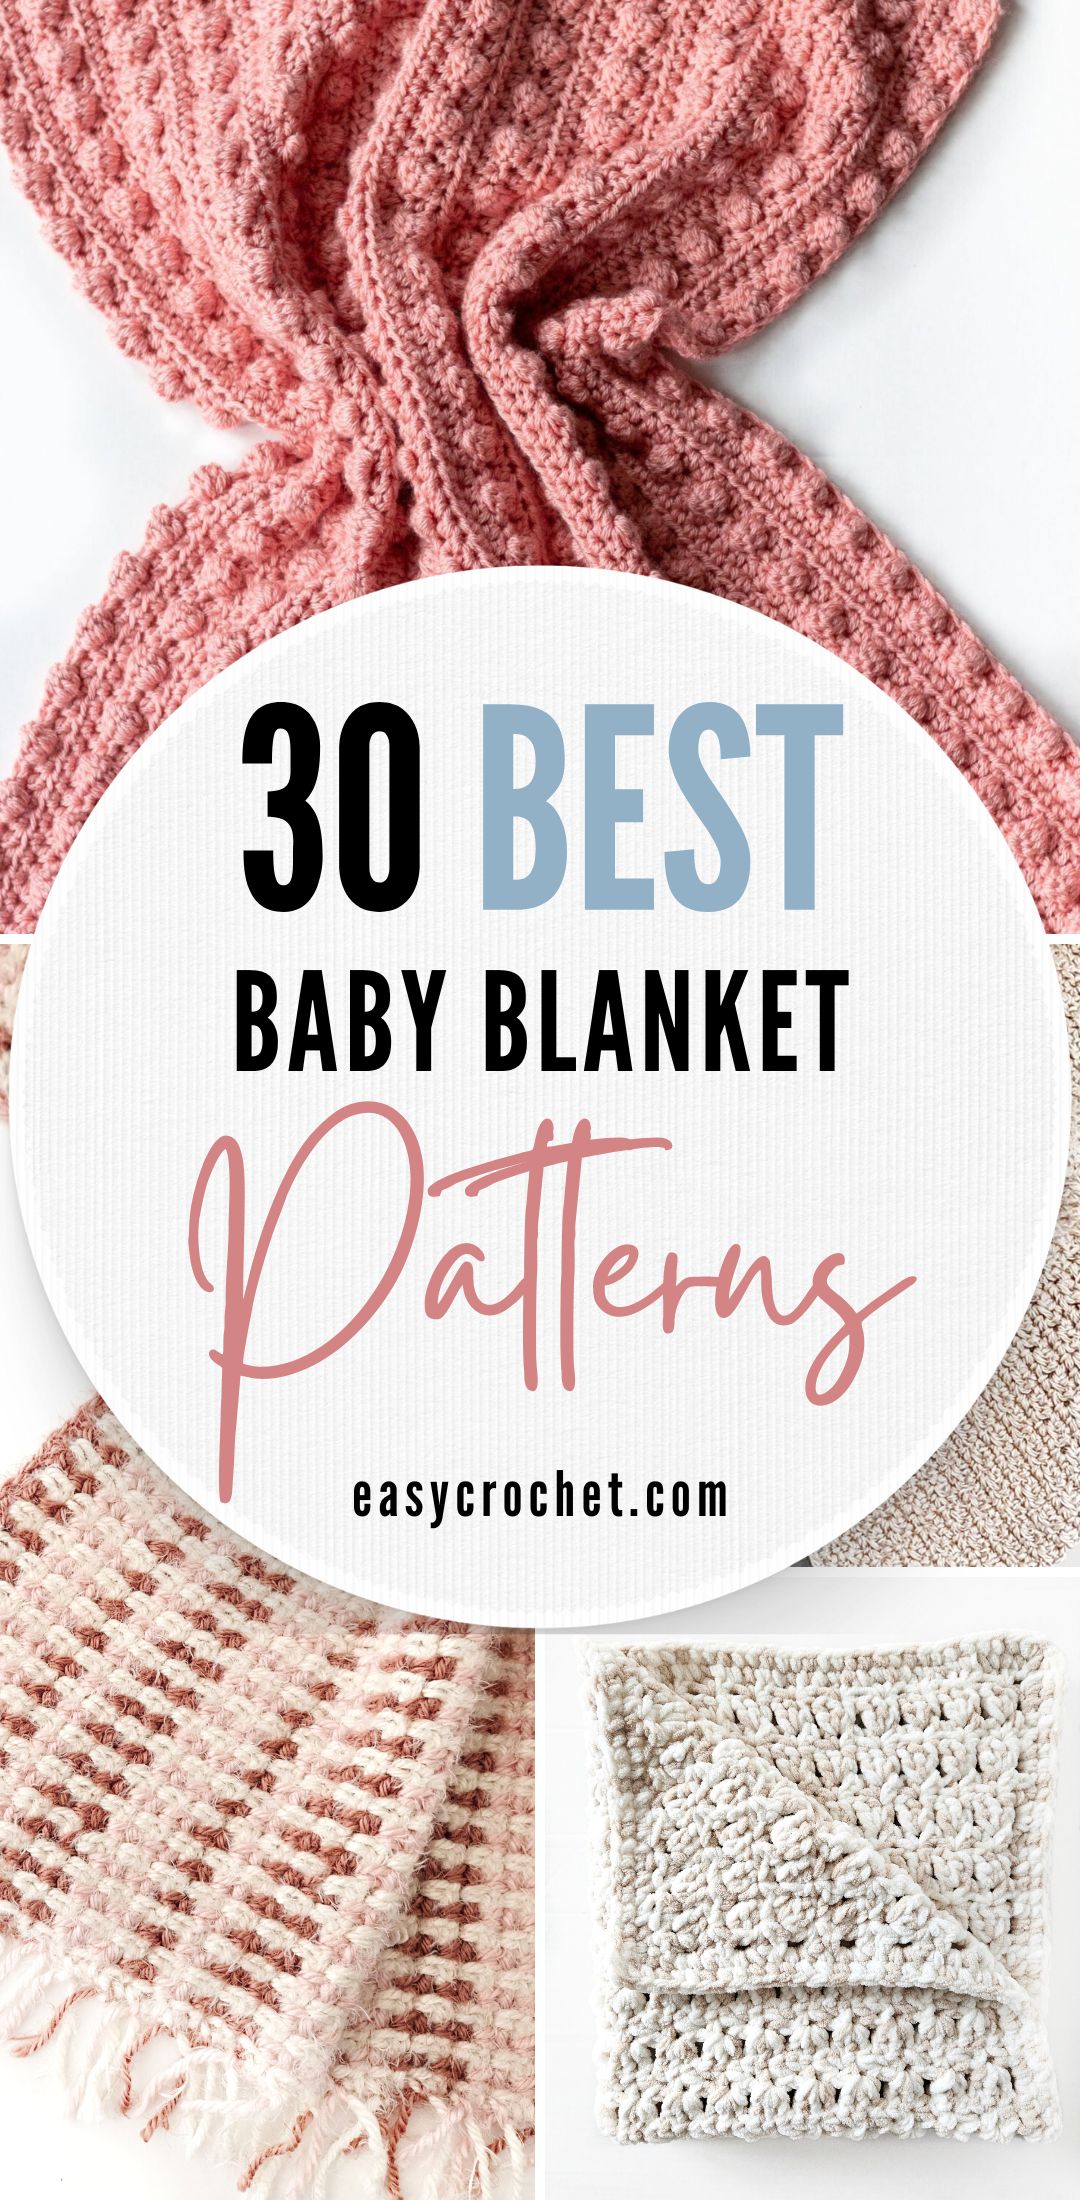 Image showing a collection of the baby blanket patterns